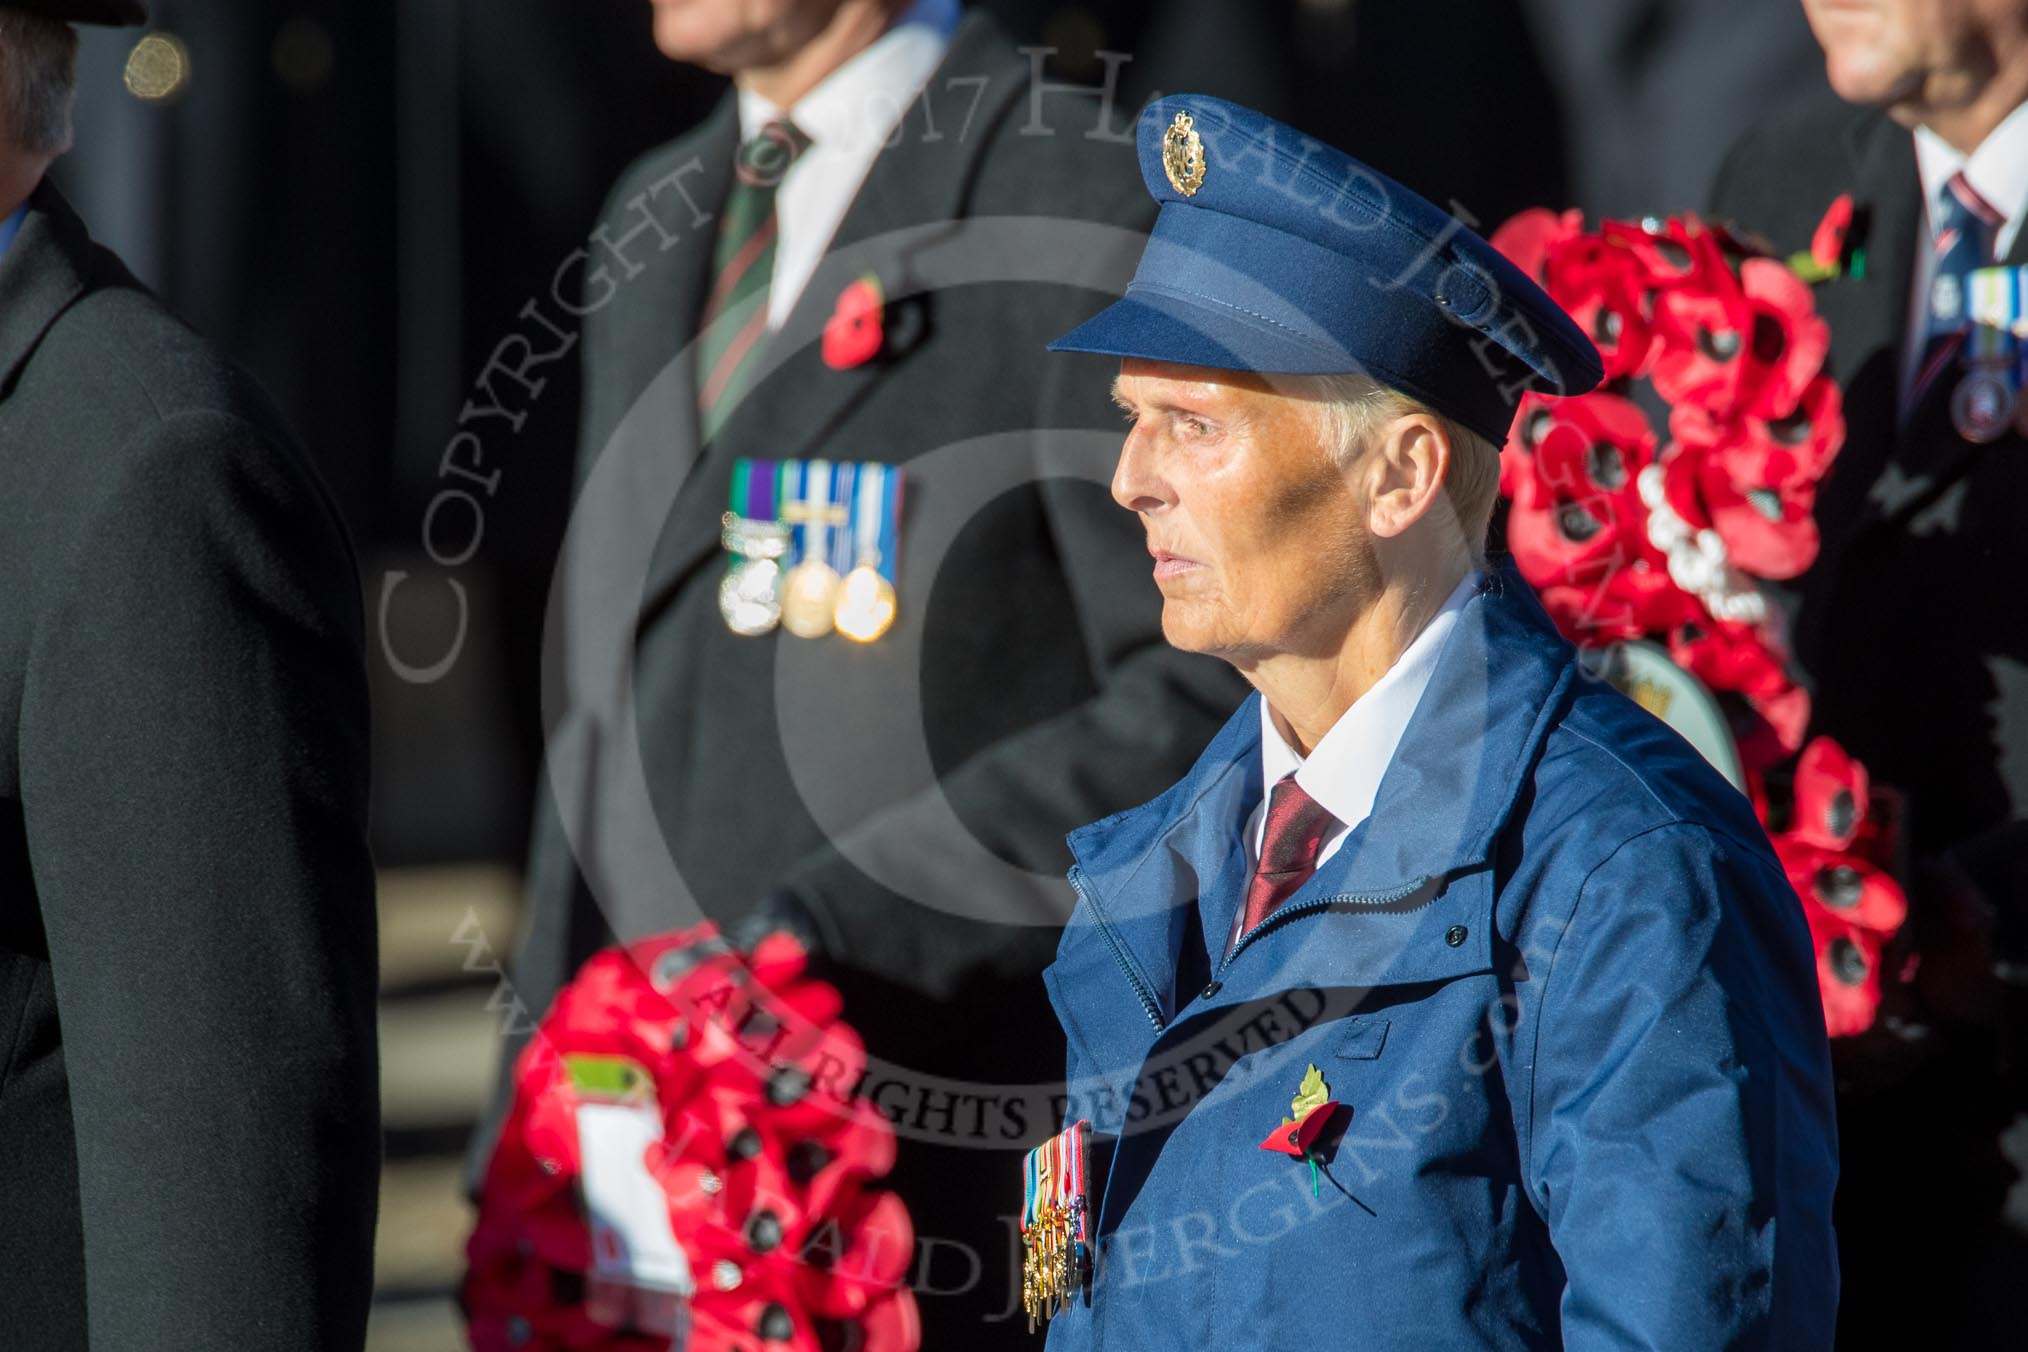 ??? as representatives of London Transport during the Remembrance Sunday Cenotaph Ceremony 2018 at Horse Guards Parade, Westminster, London, 11 November 2018, 11:28.